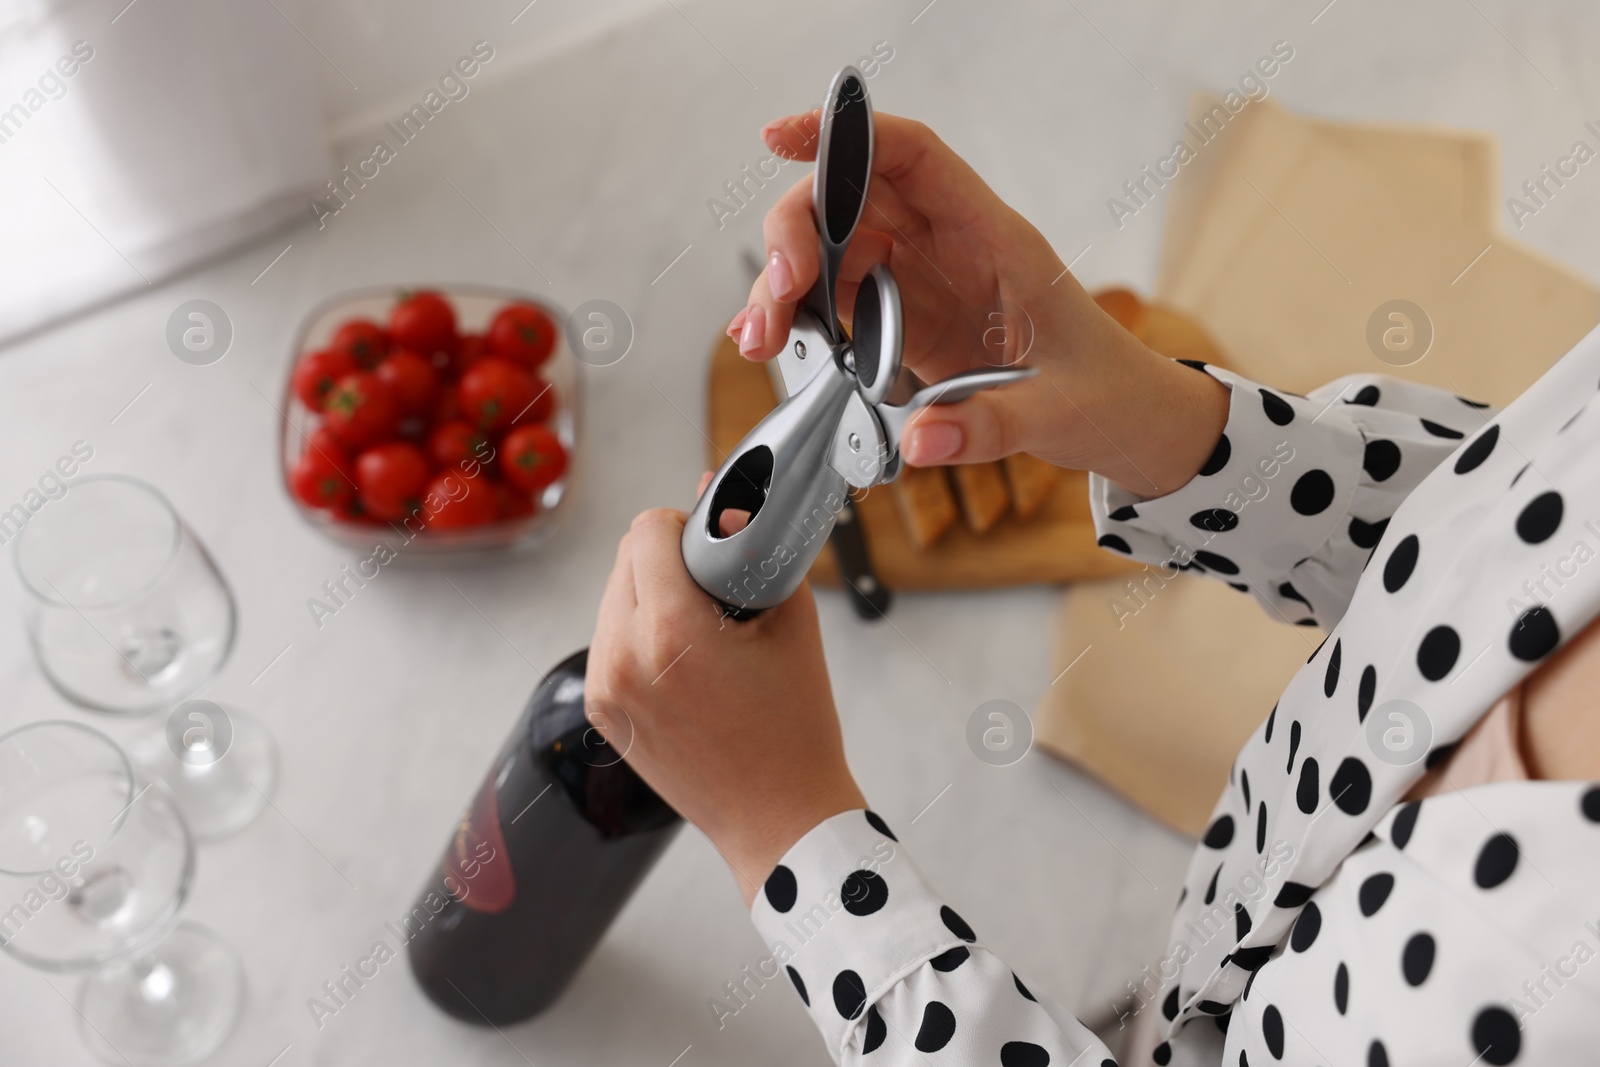 Photo of Romantic dinner. Woman opening wine bottle with corkscrew at table, above view